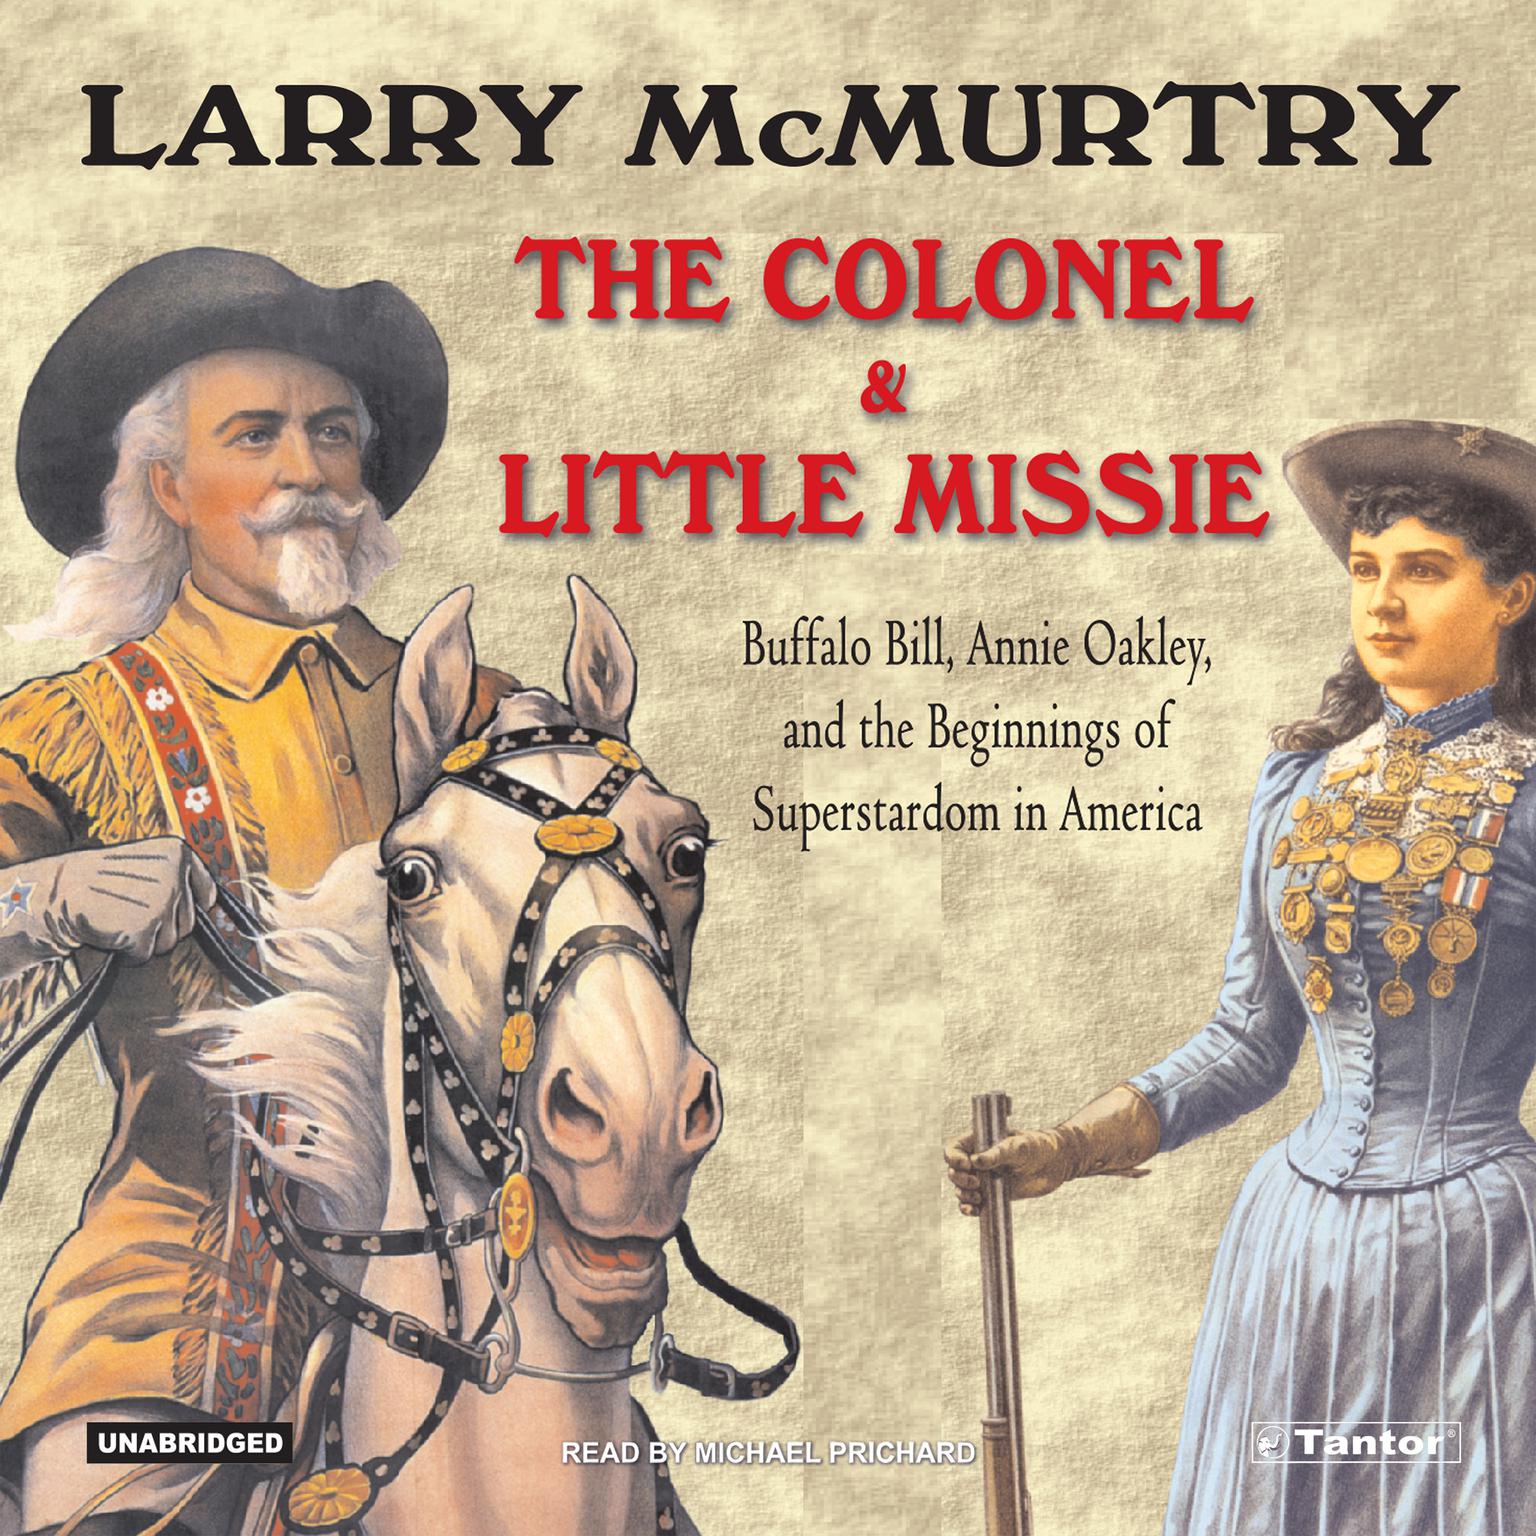 The Colonel and Little Missie Audiobook by Larry McMurtry — Listen Now